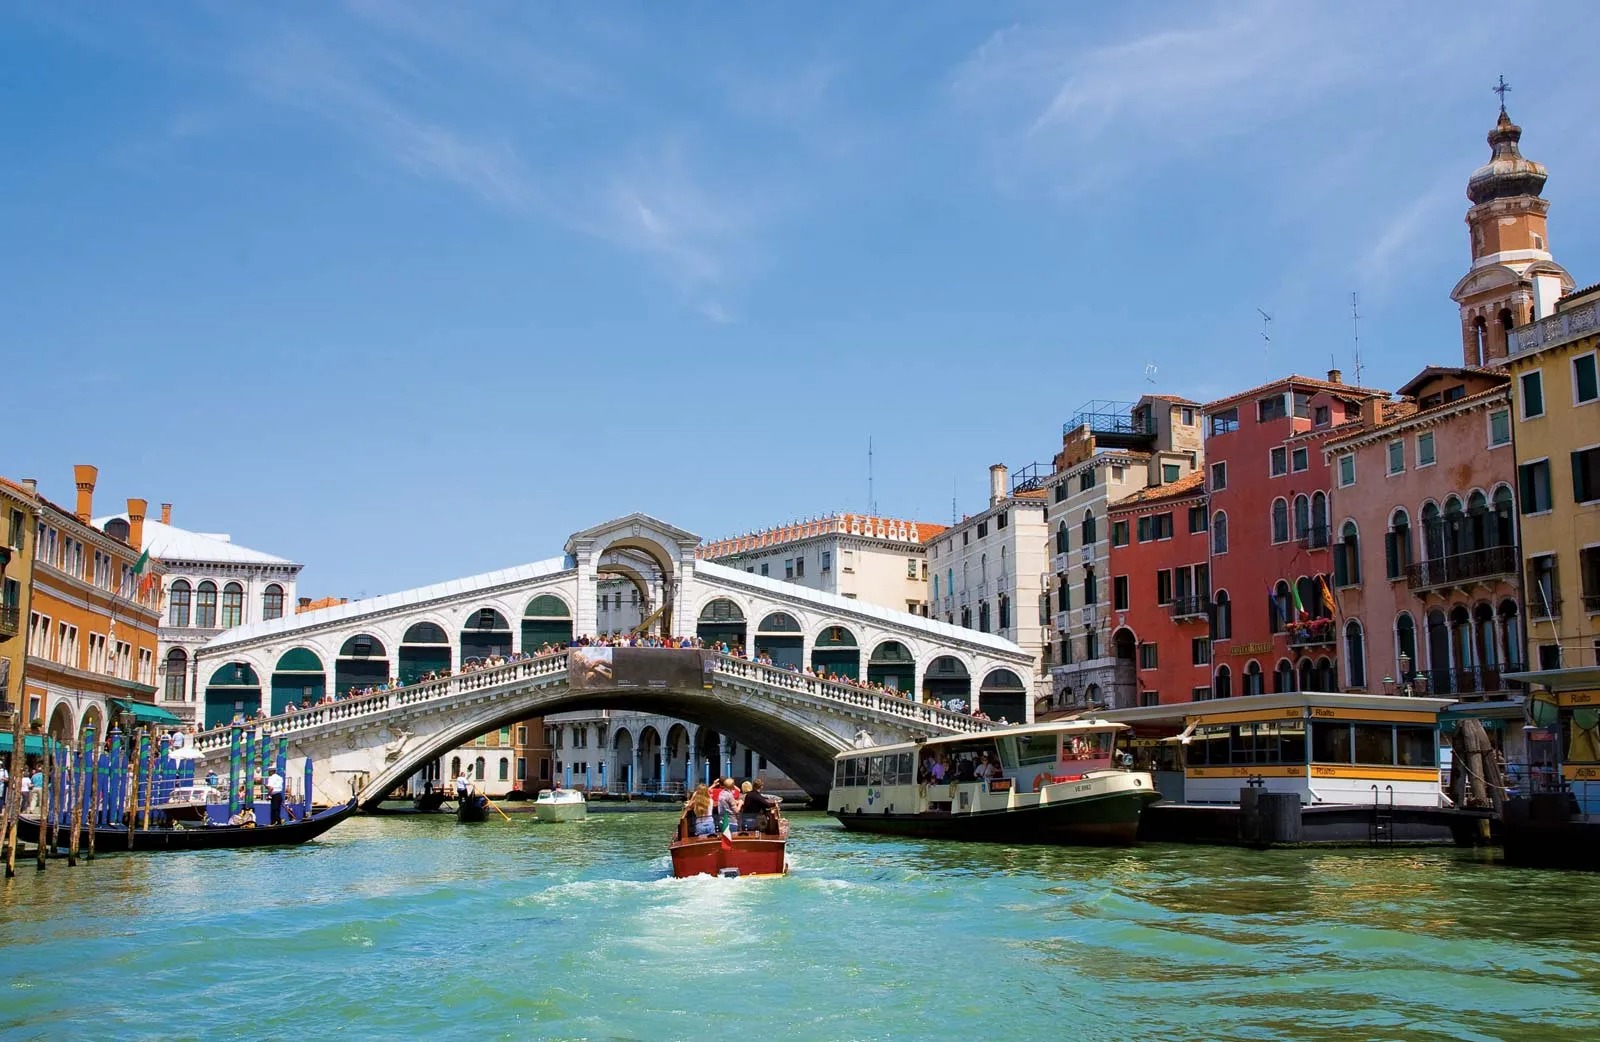 Take Trip Around Italy in This Quiz — If You Get 18, You Win Rialto Bridge at Grand Canal, Venice, Italy